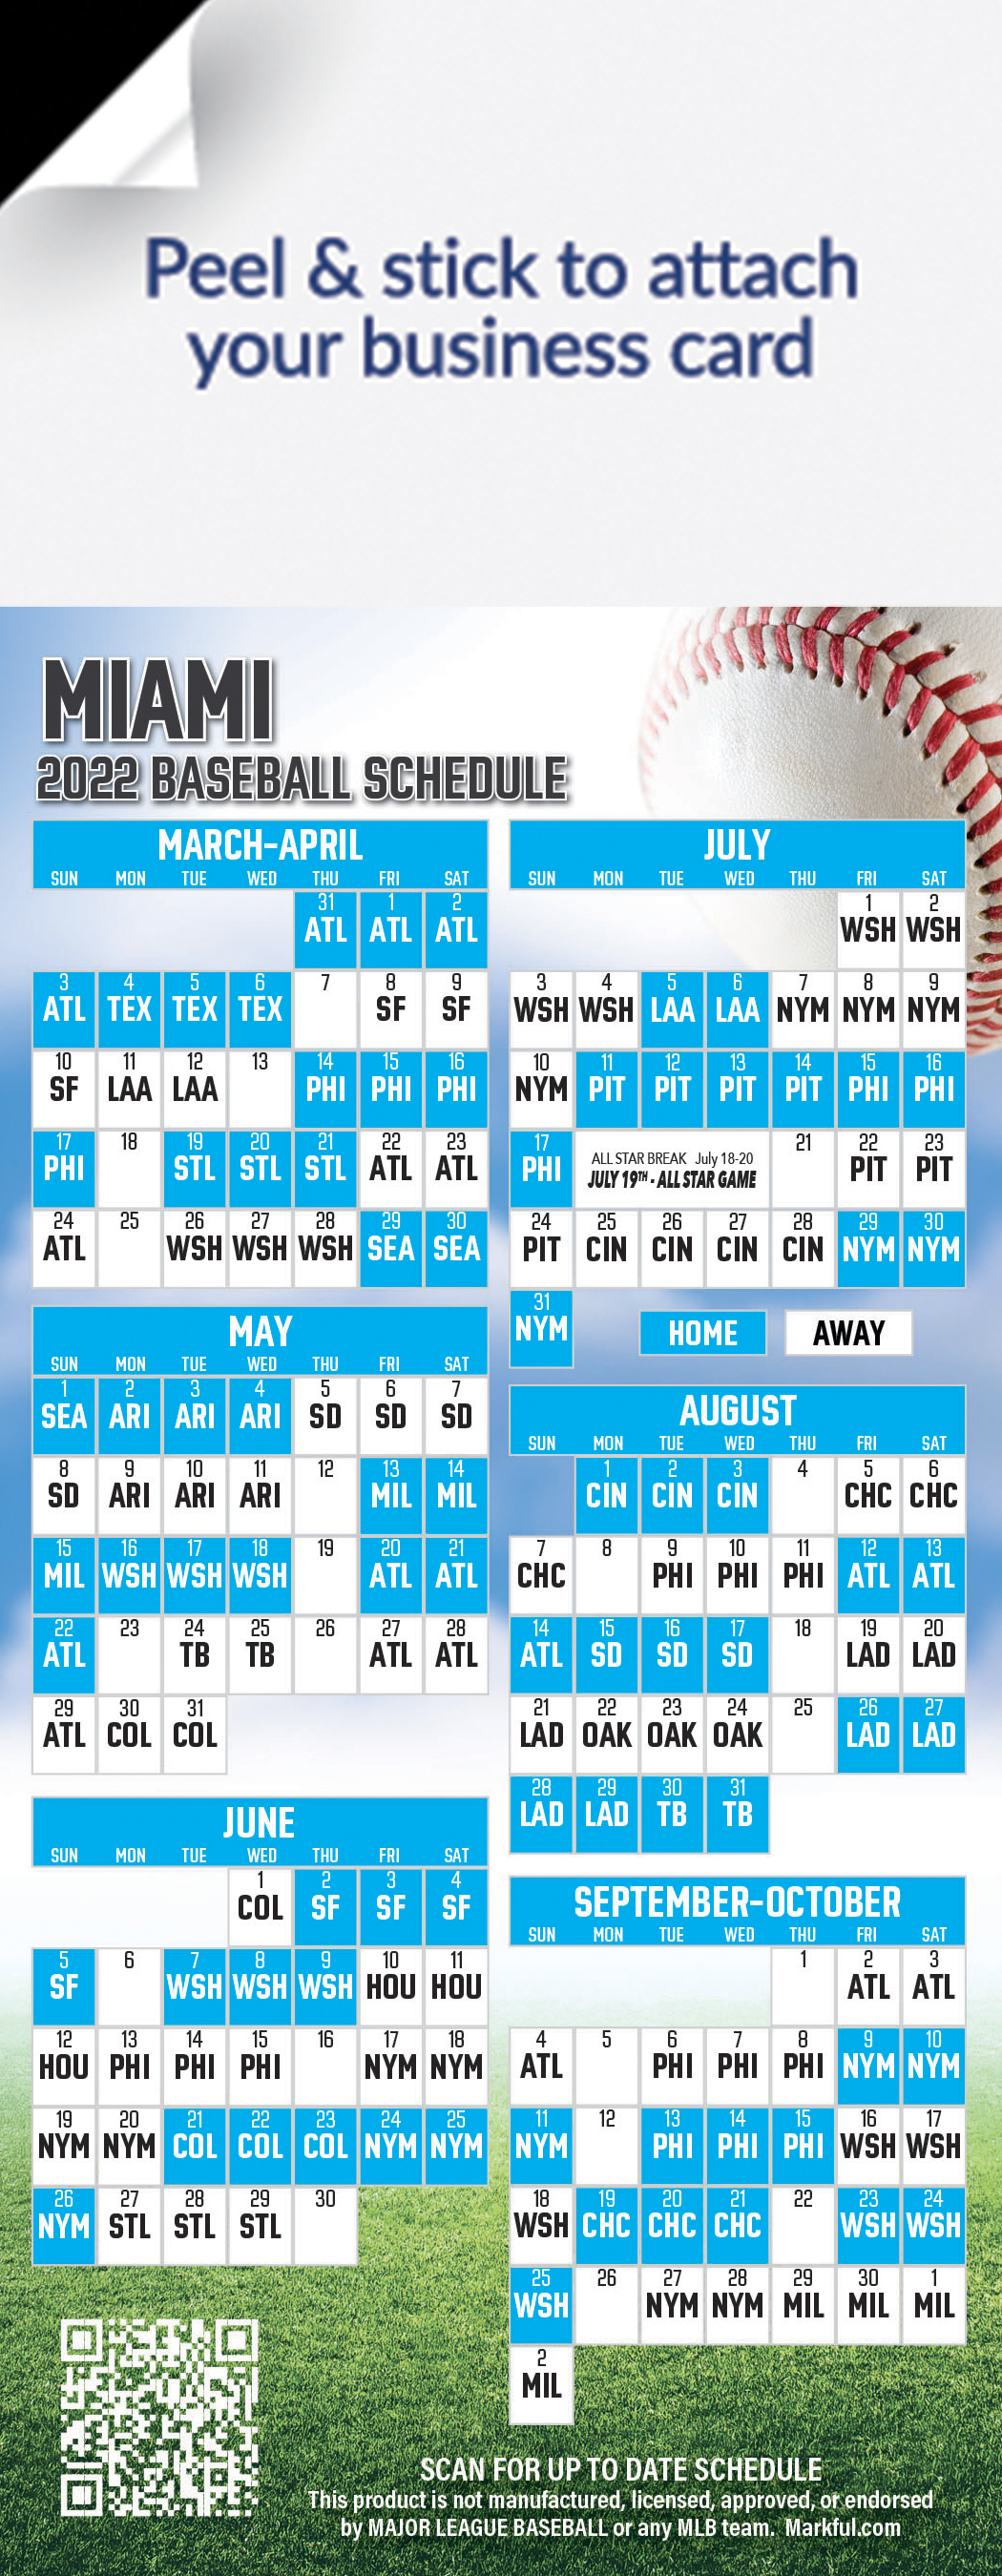 Miami Marlins Schedule 2022 2022 Miami Marlins Schedule Magnets & Magnetic Schedules | Markful